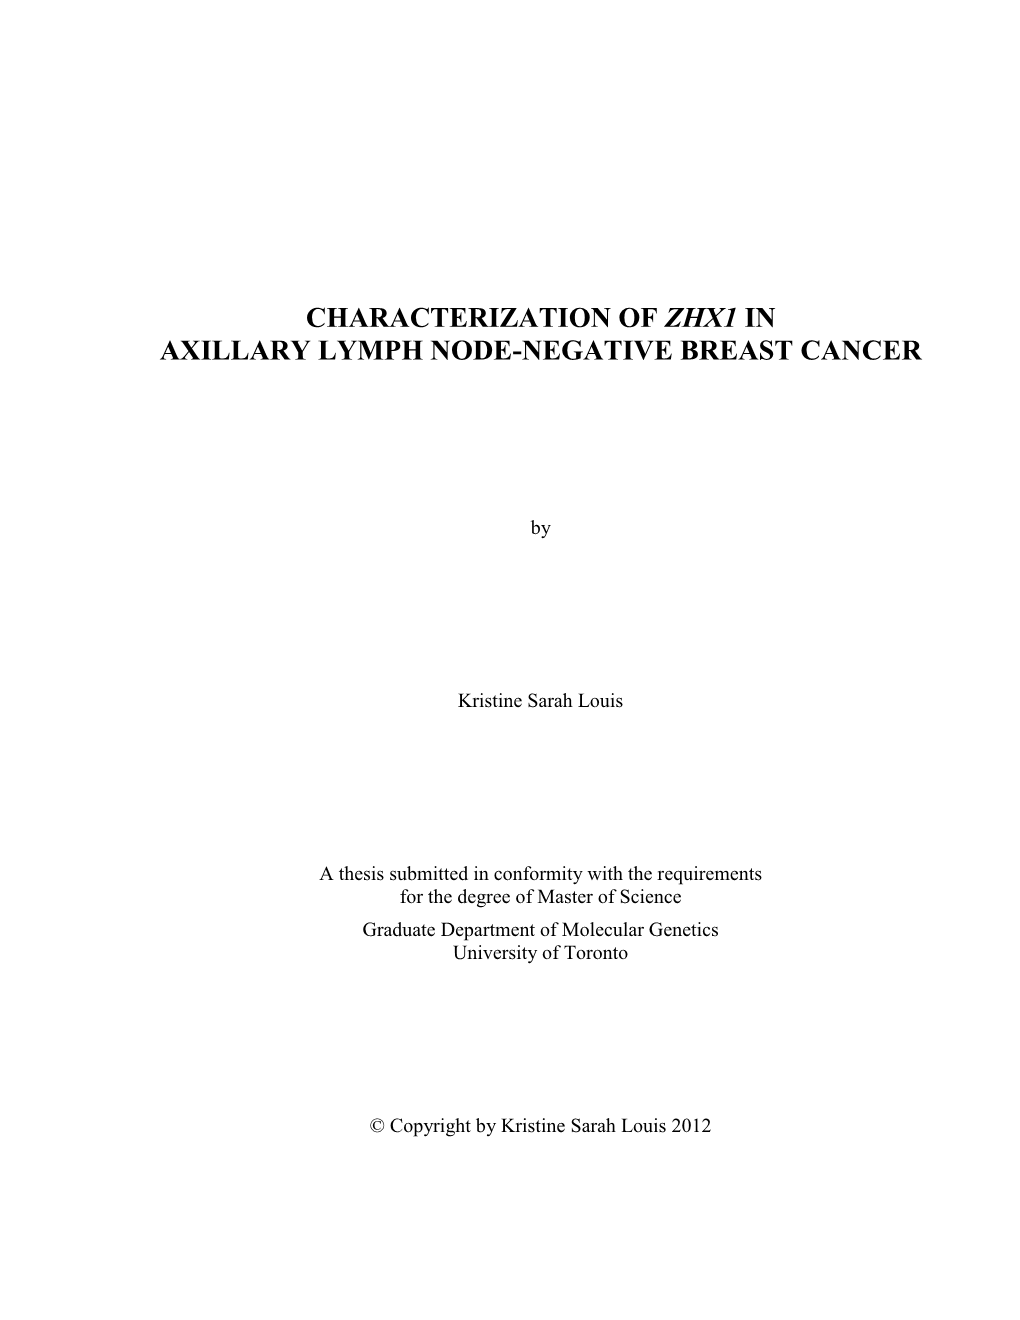 Characterization of Zhx1 in Axillary Lymph Node-Negative Breast Cancer